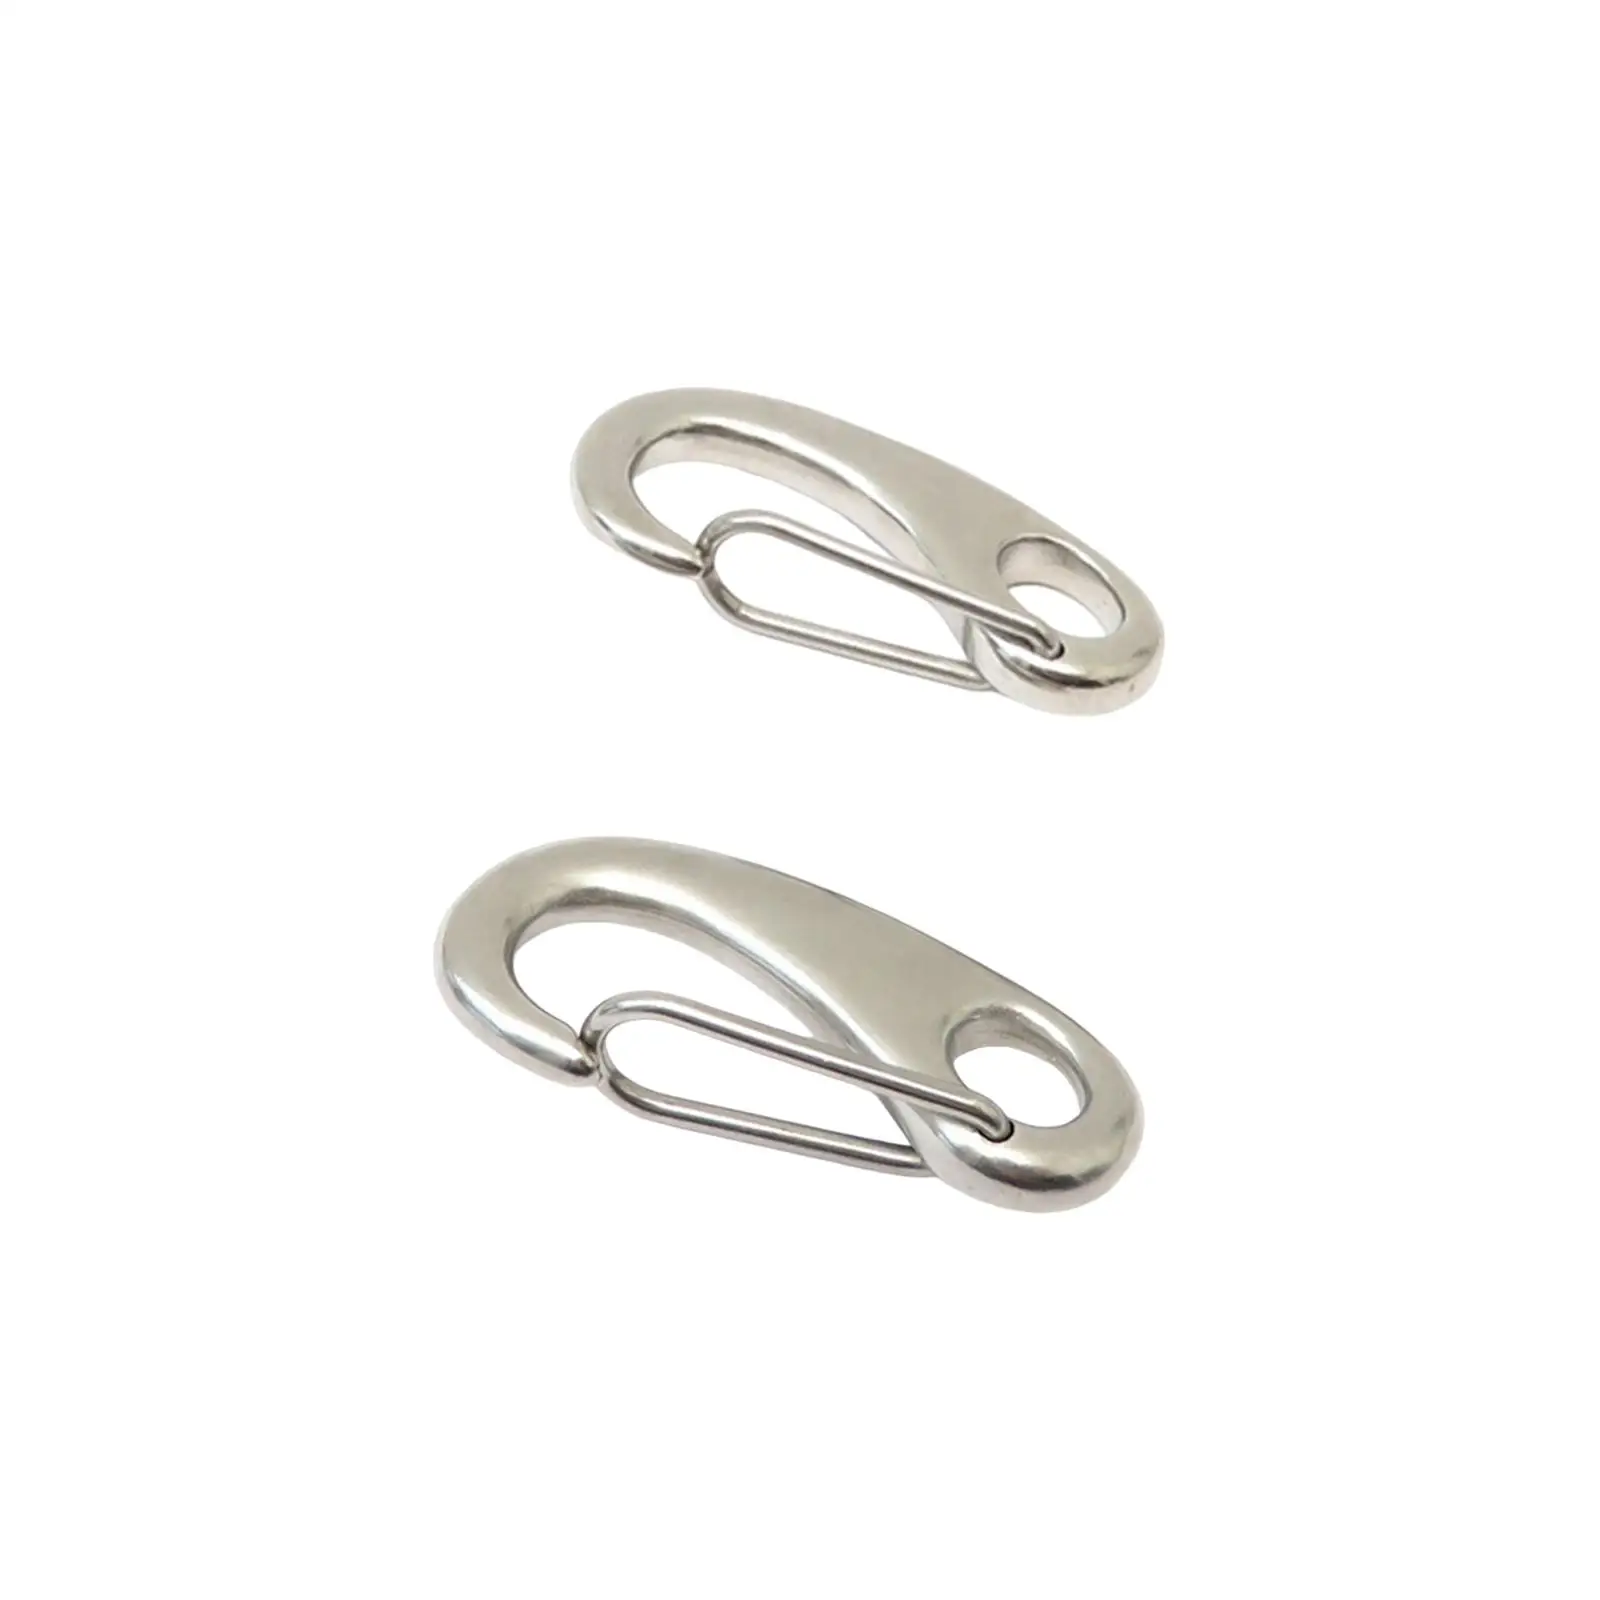 Durable Spring Snap Hook Clip Key Rings Improved SS316 Stainless Clasp Carabiners Clip for Scuba Diving